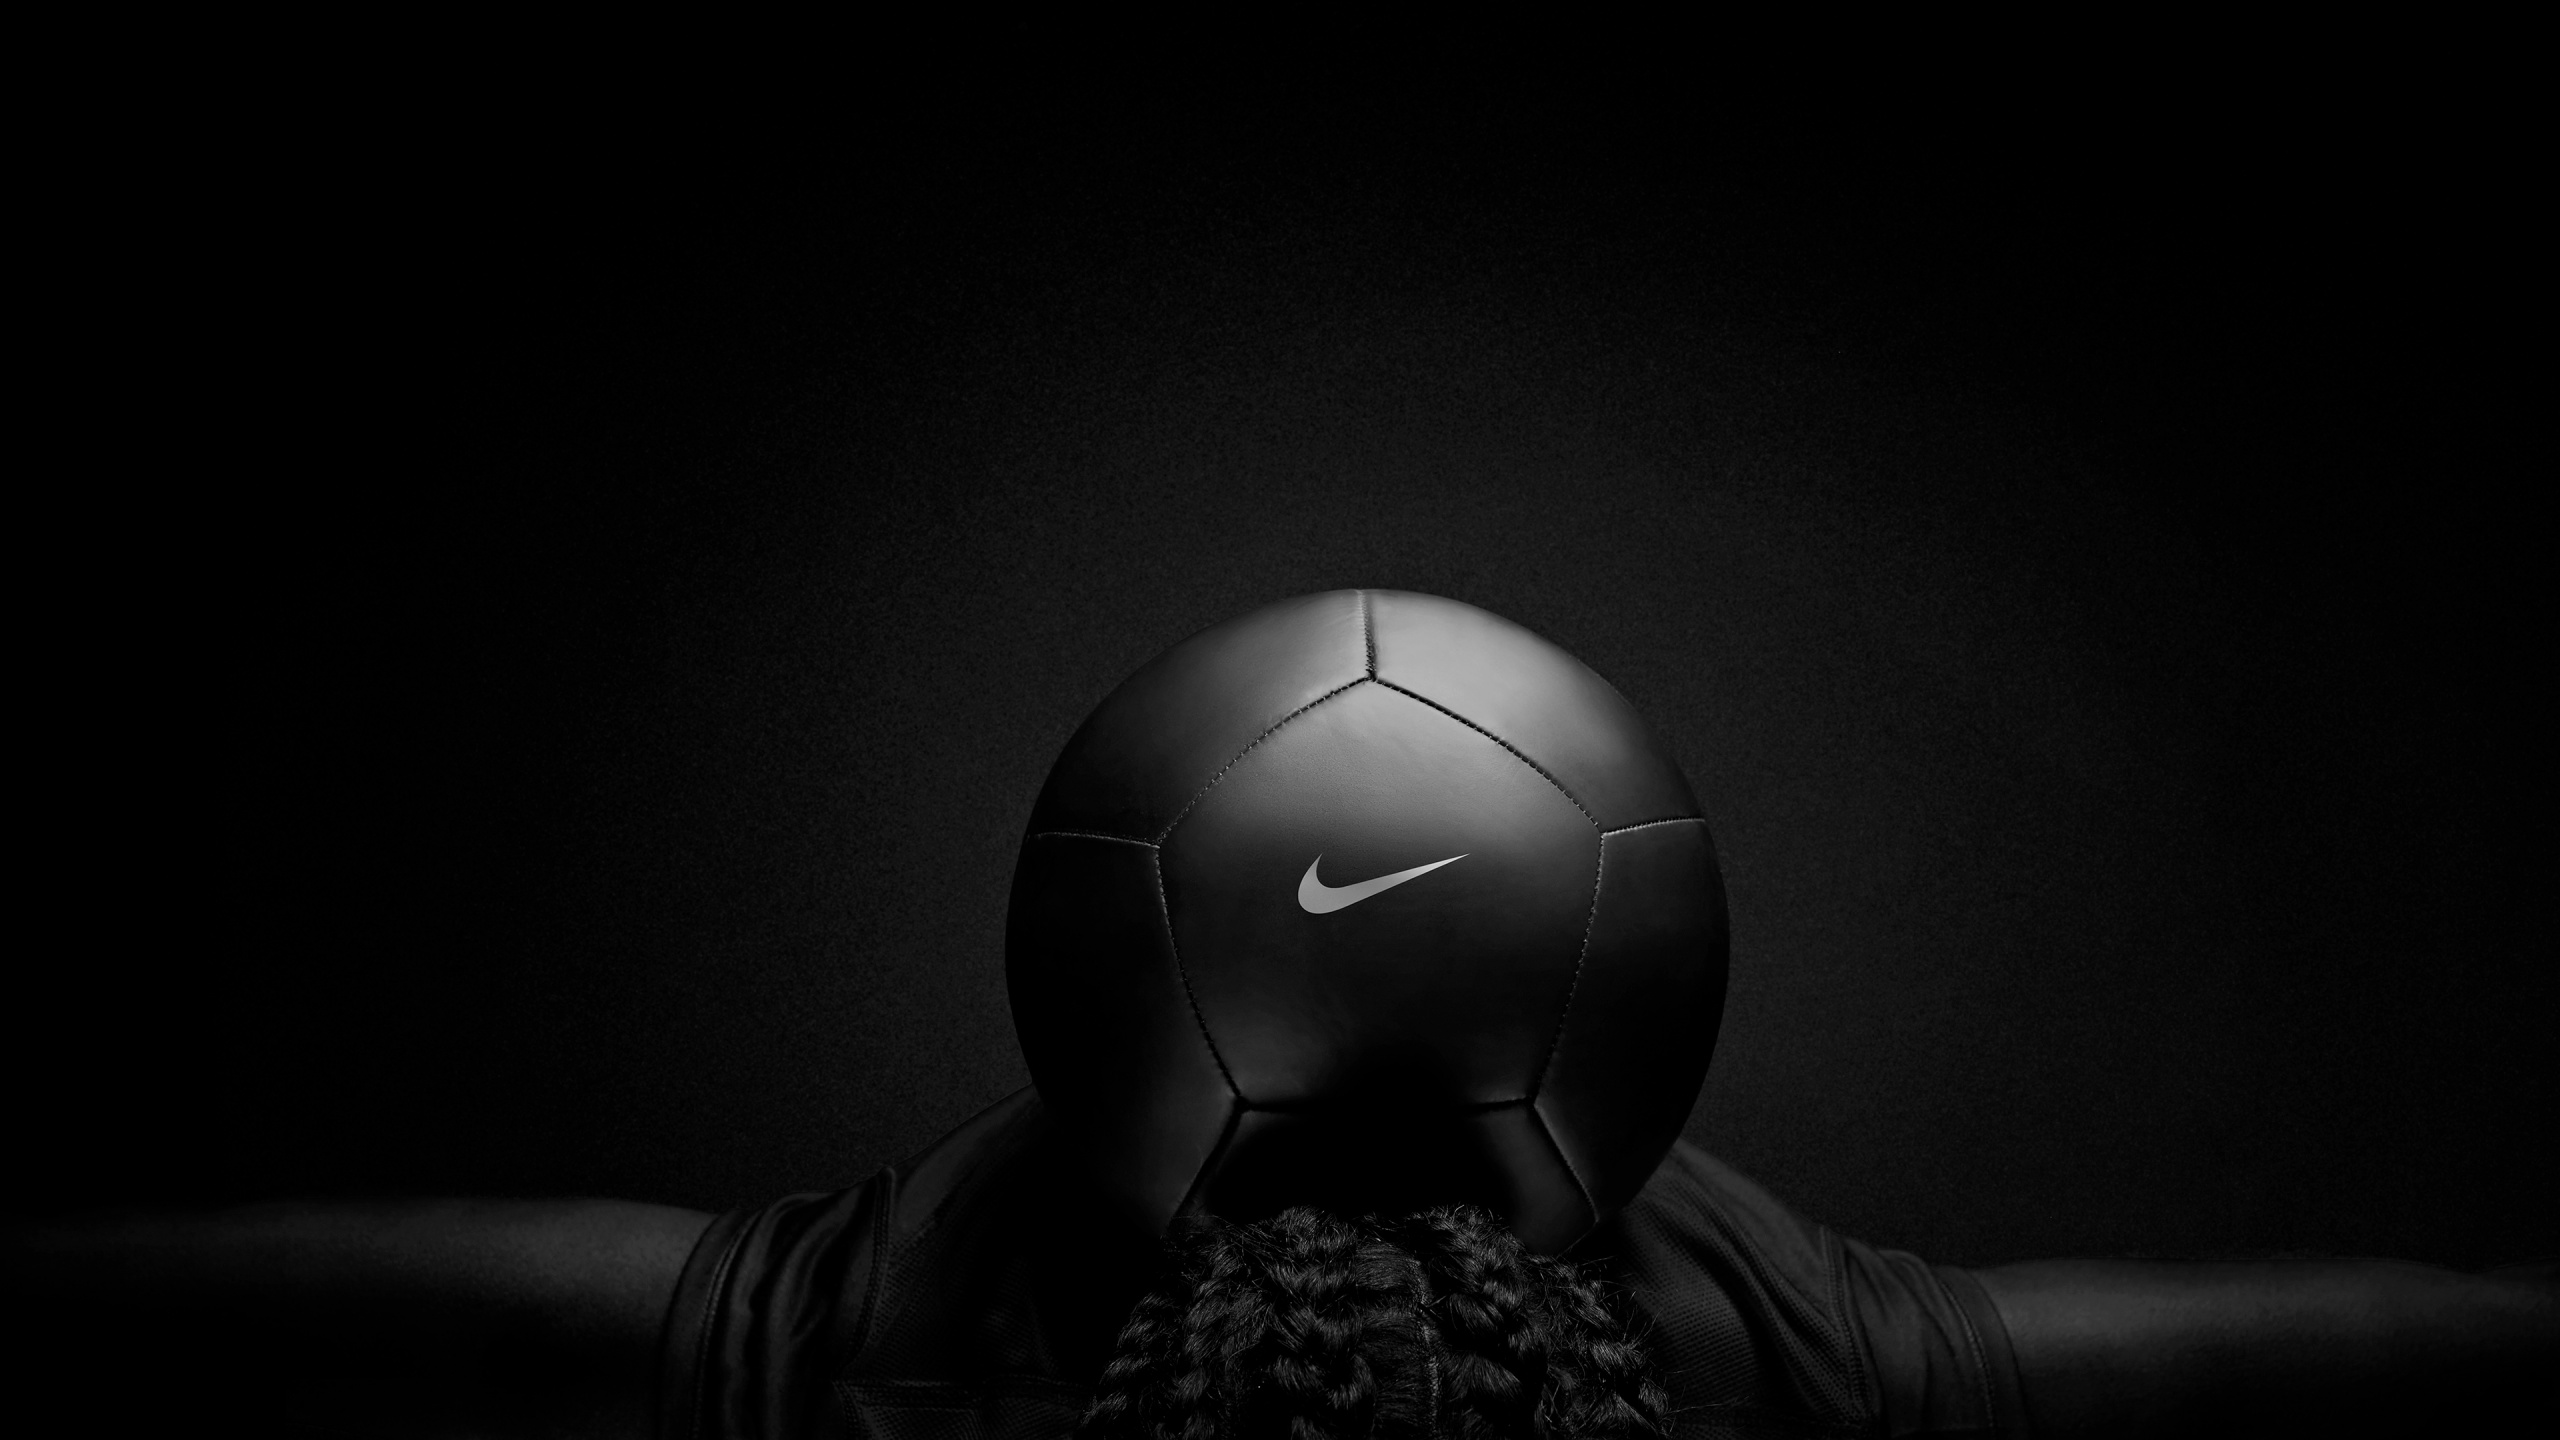 Grayscale Photo of Soccer Ball. Wallpaper in 2560x1440 Resolution